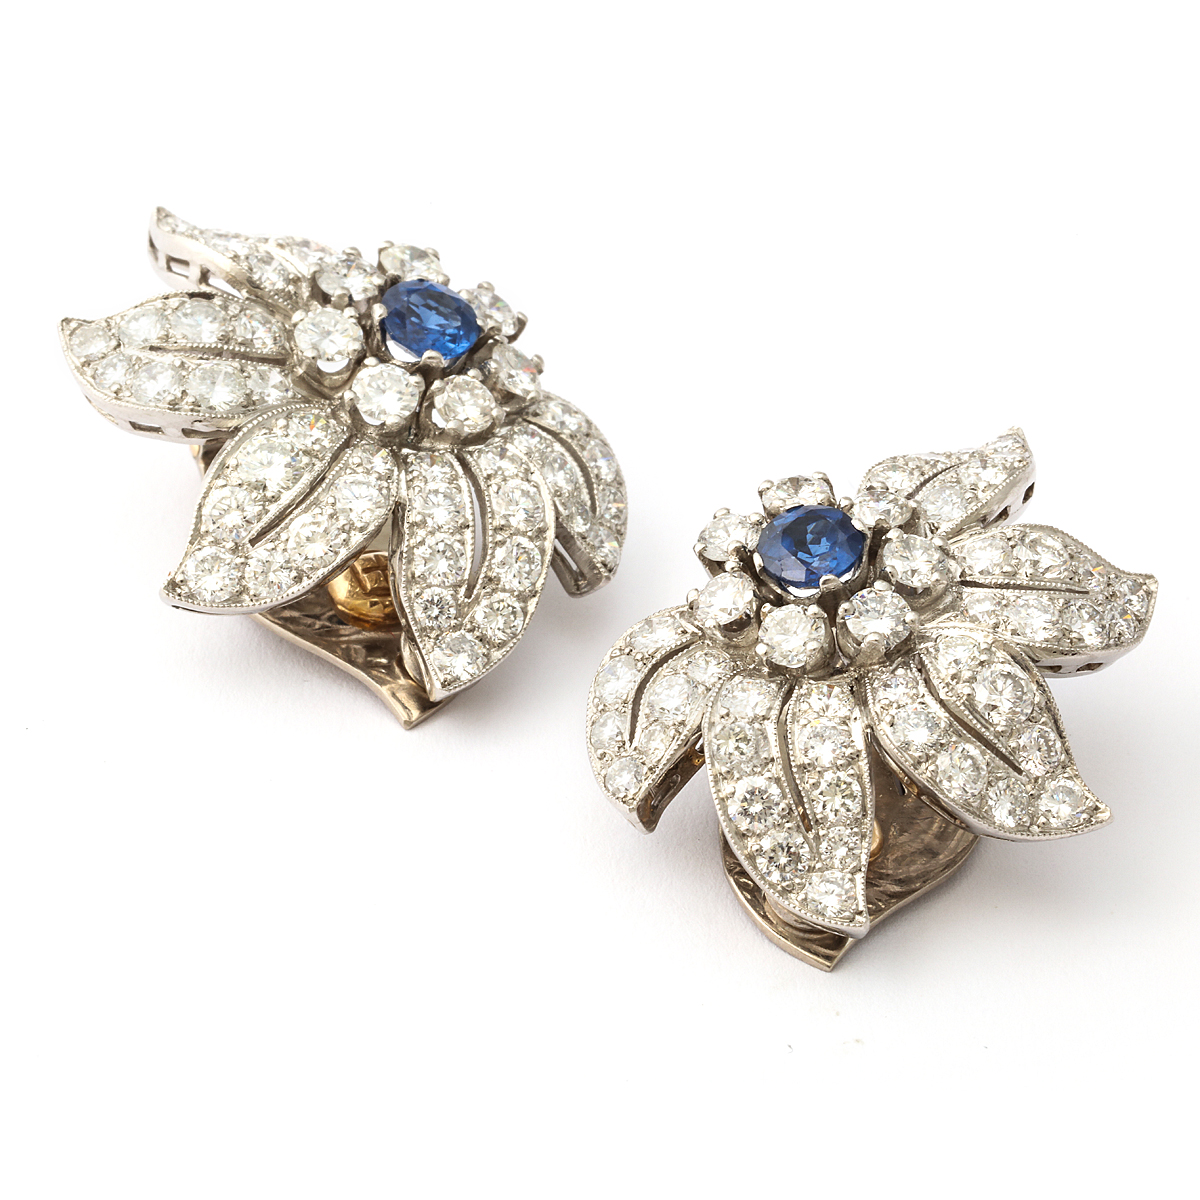 Sapphire and Diamond Floral Clip Earrings – A La Vieille Russie FABERGE ...